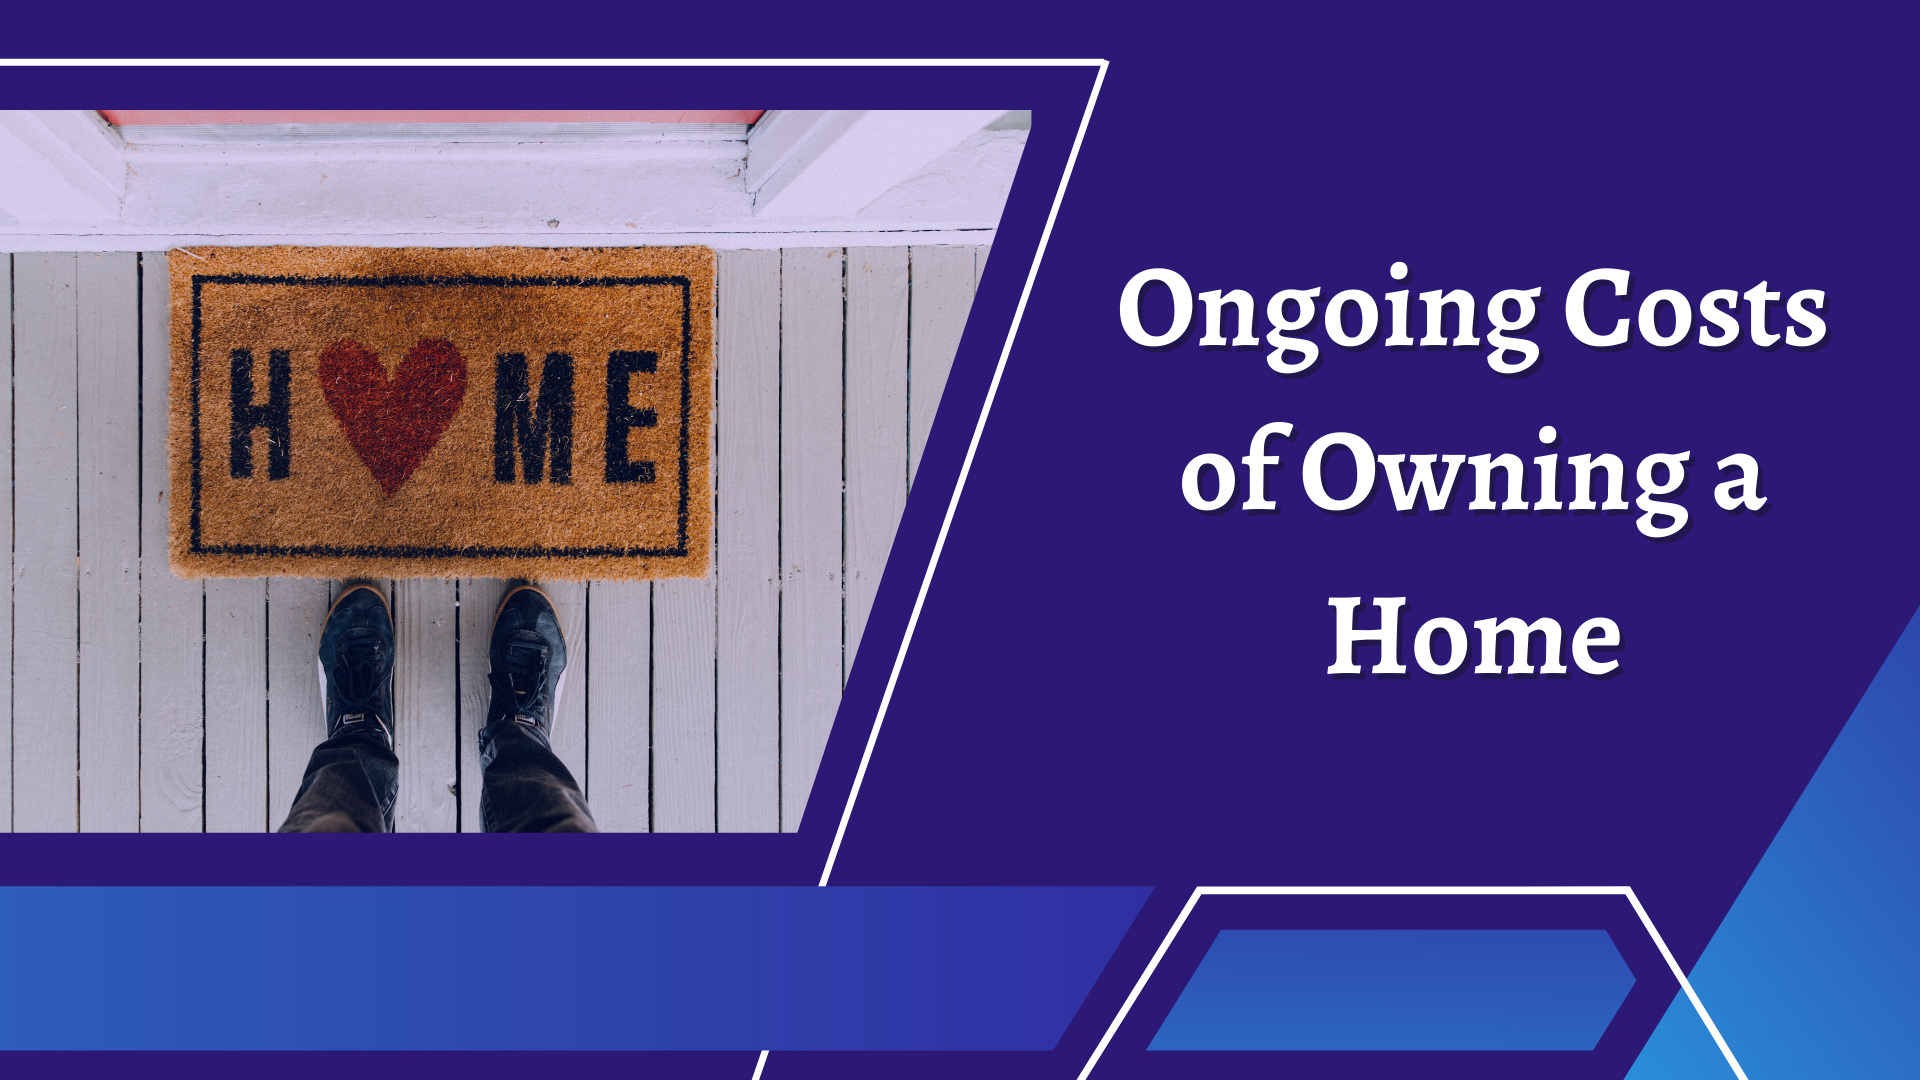 Ongoing Costs of Owning a Home